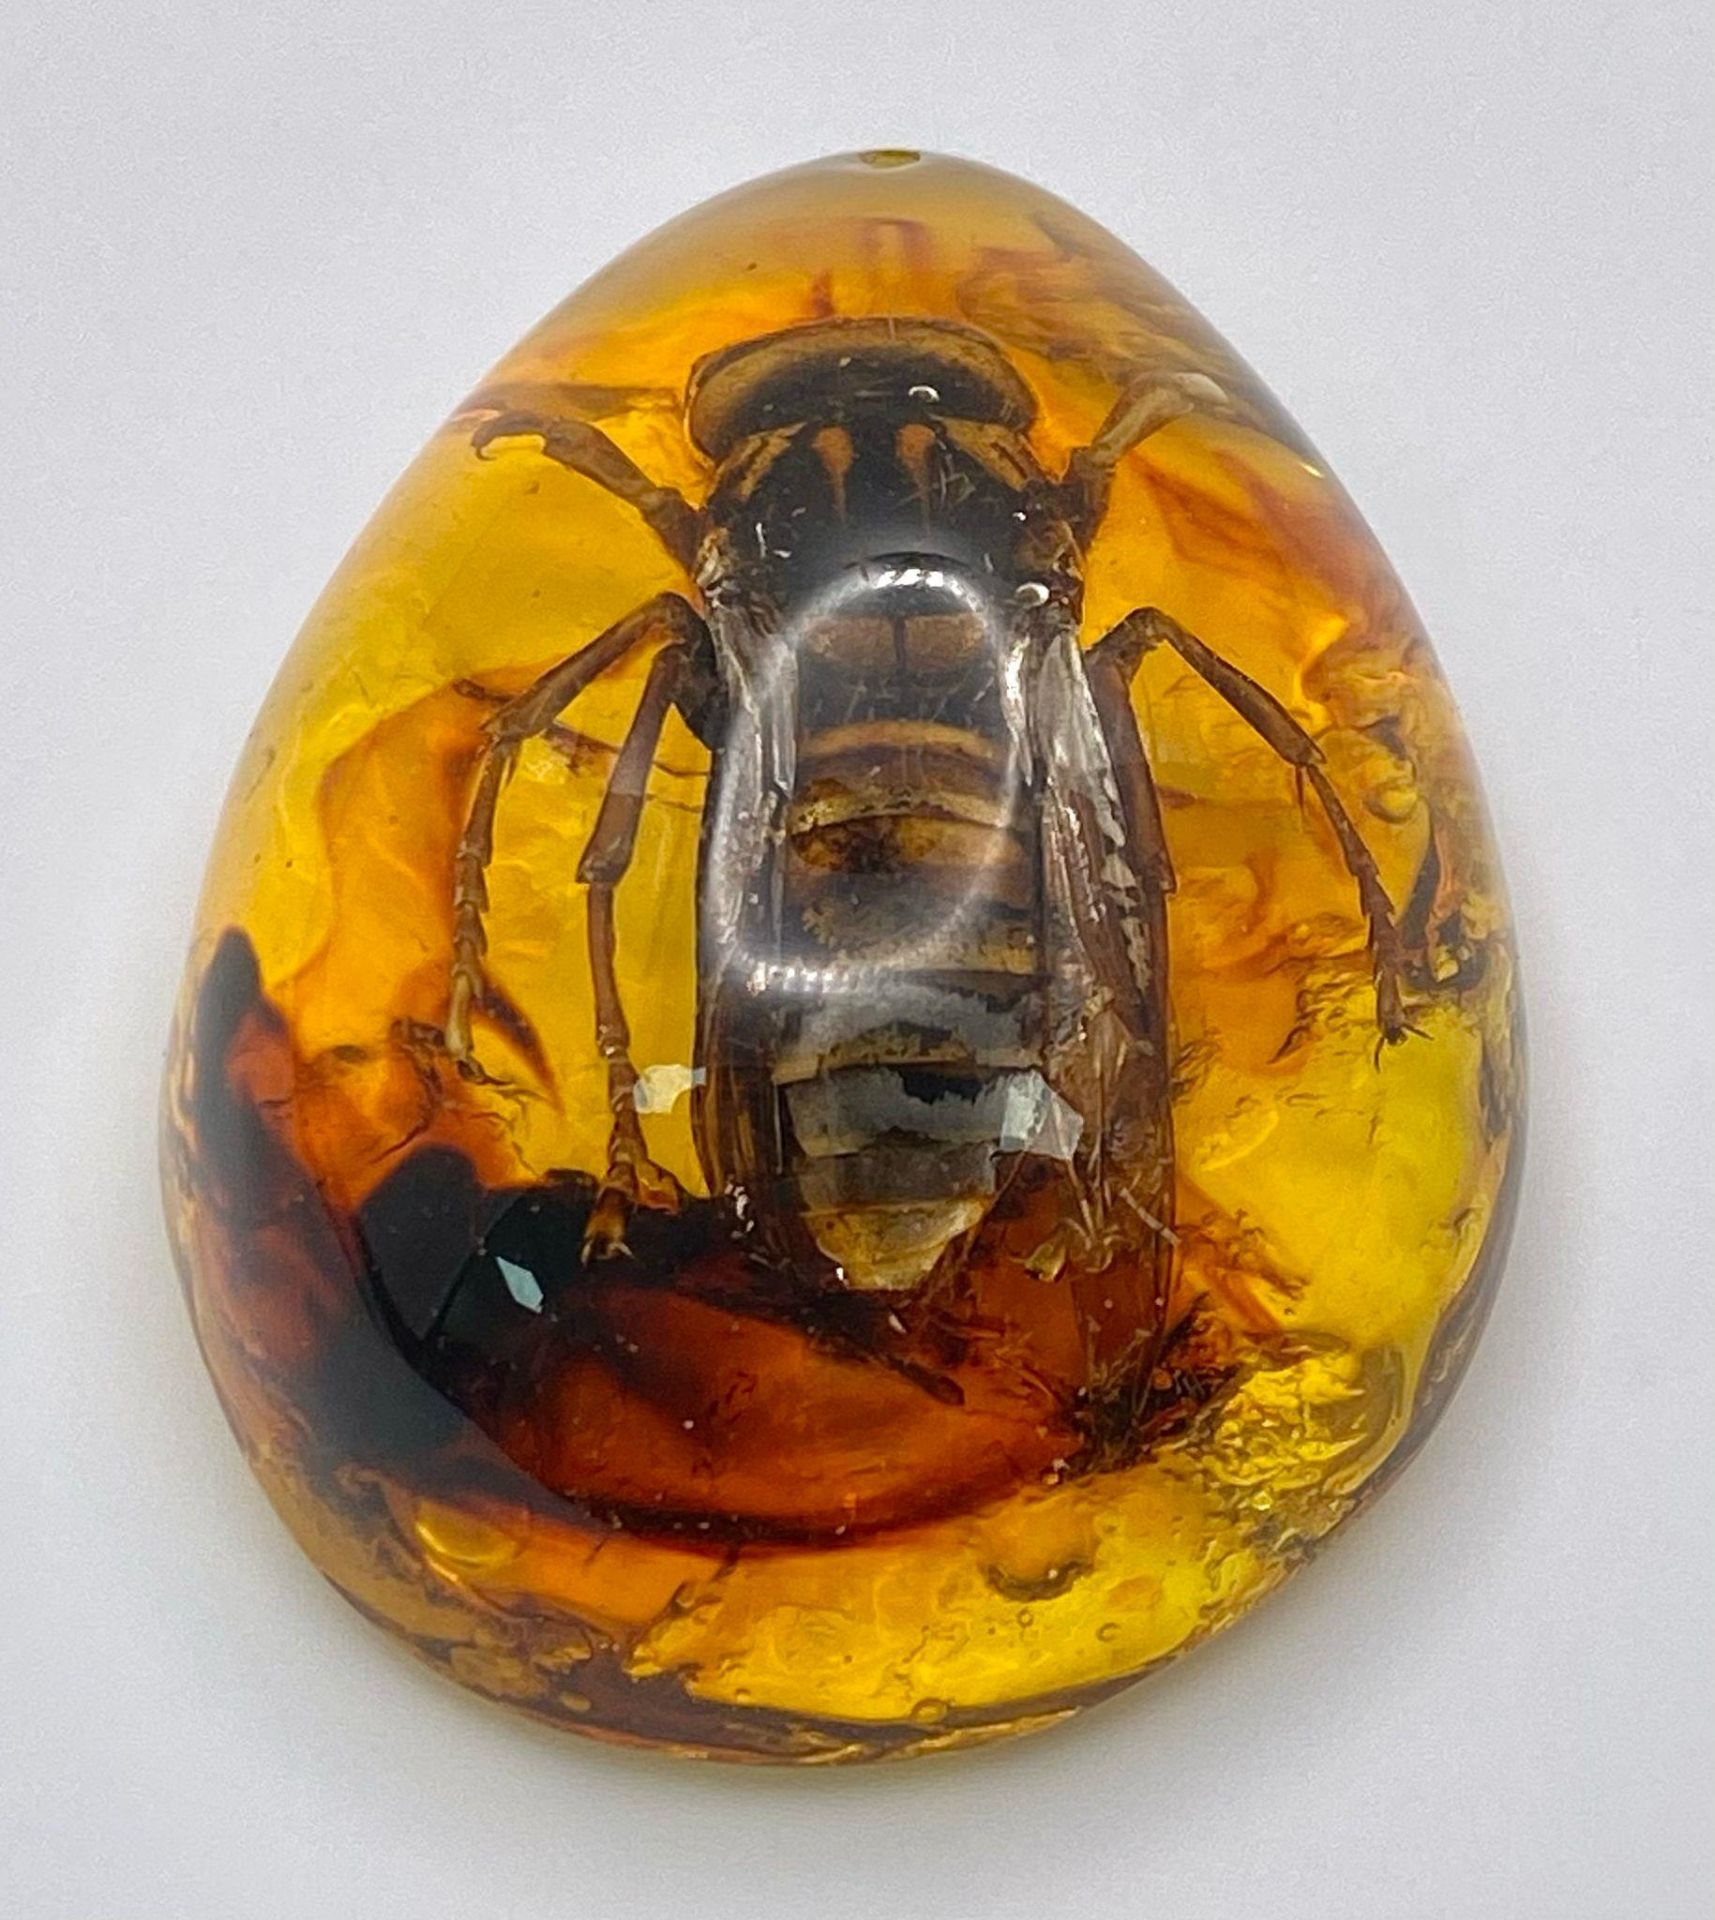 A Rather Large Asian Hornet Relaxes in an Amber Resin Bath. Pendant or paperweight. 6cm